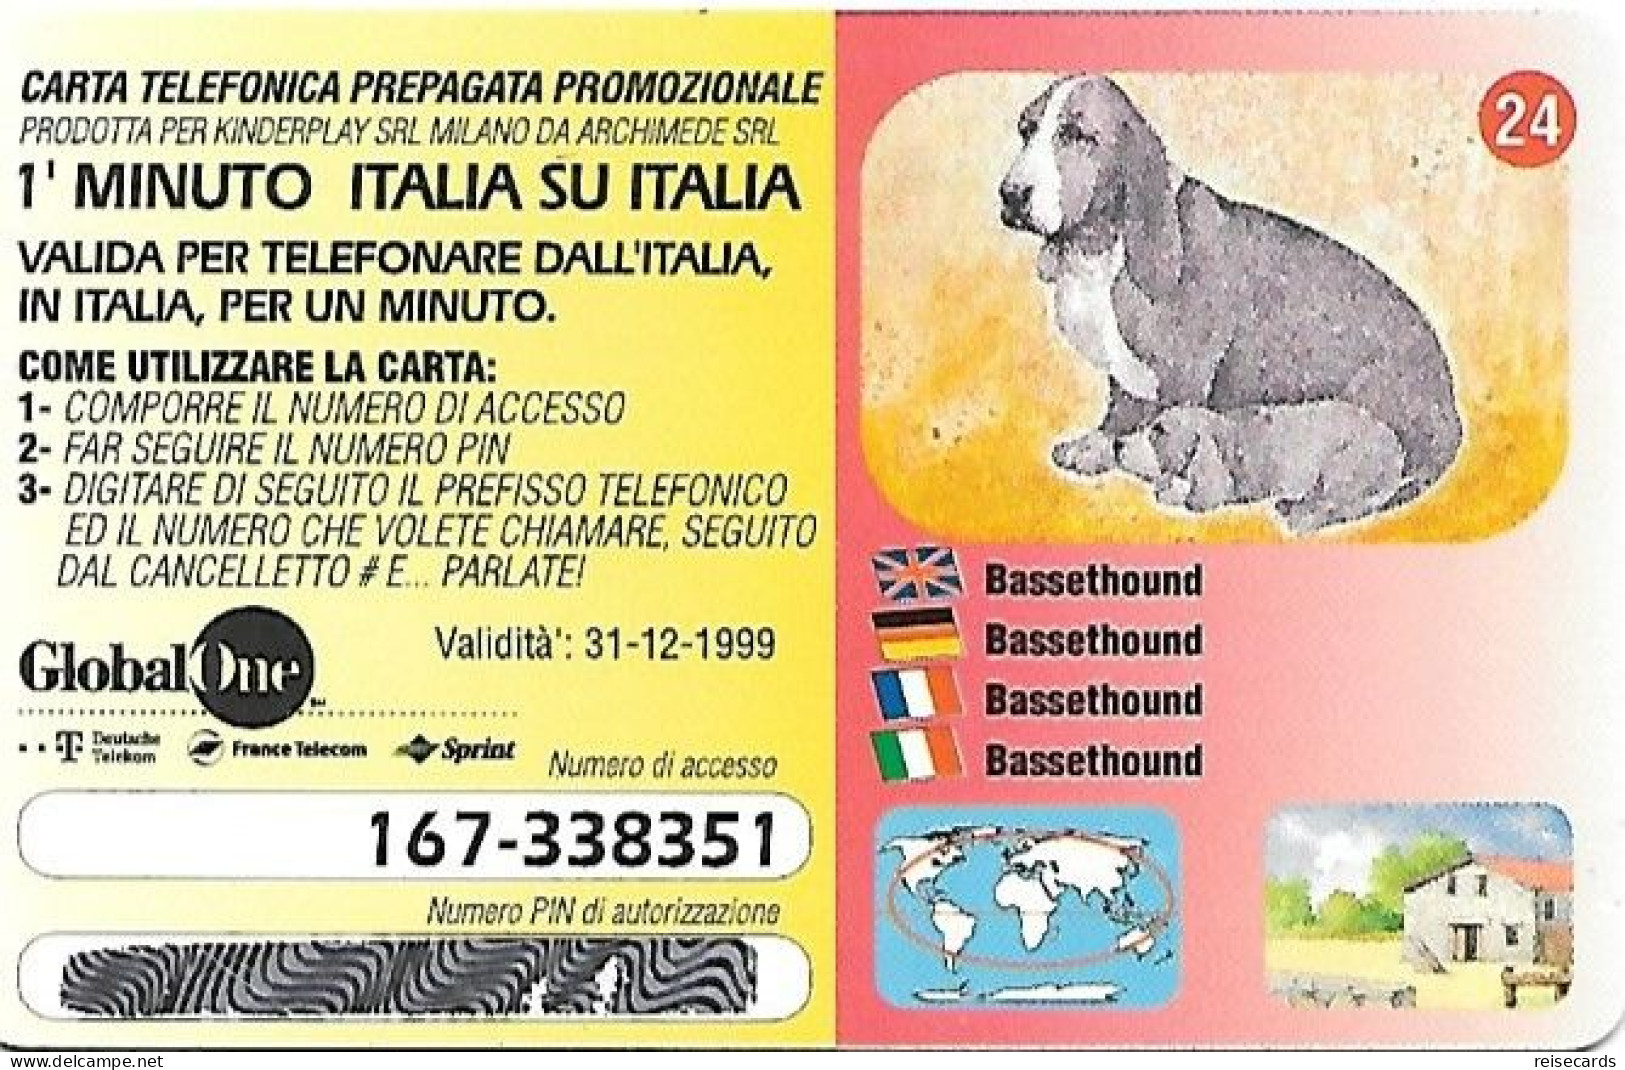 Italy: Prepaid GlobalOne - Save The Planet 24, Basset - Schede GSM, Prepagate & Ricariche